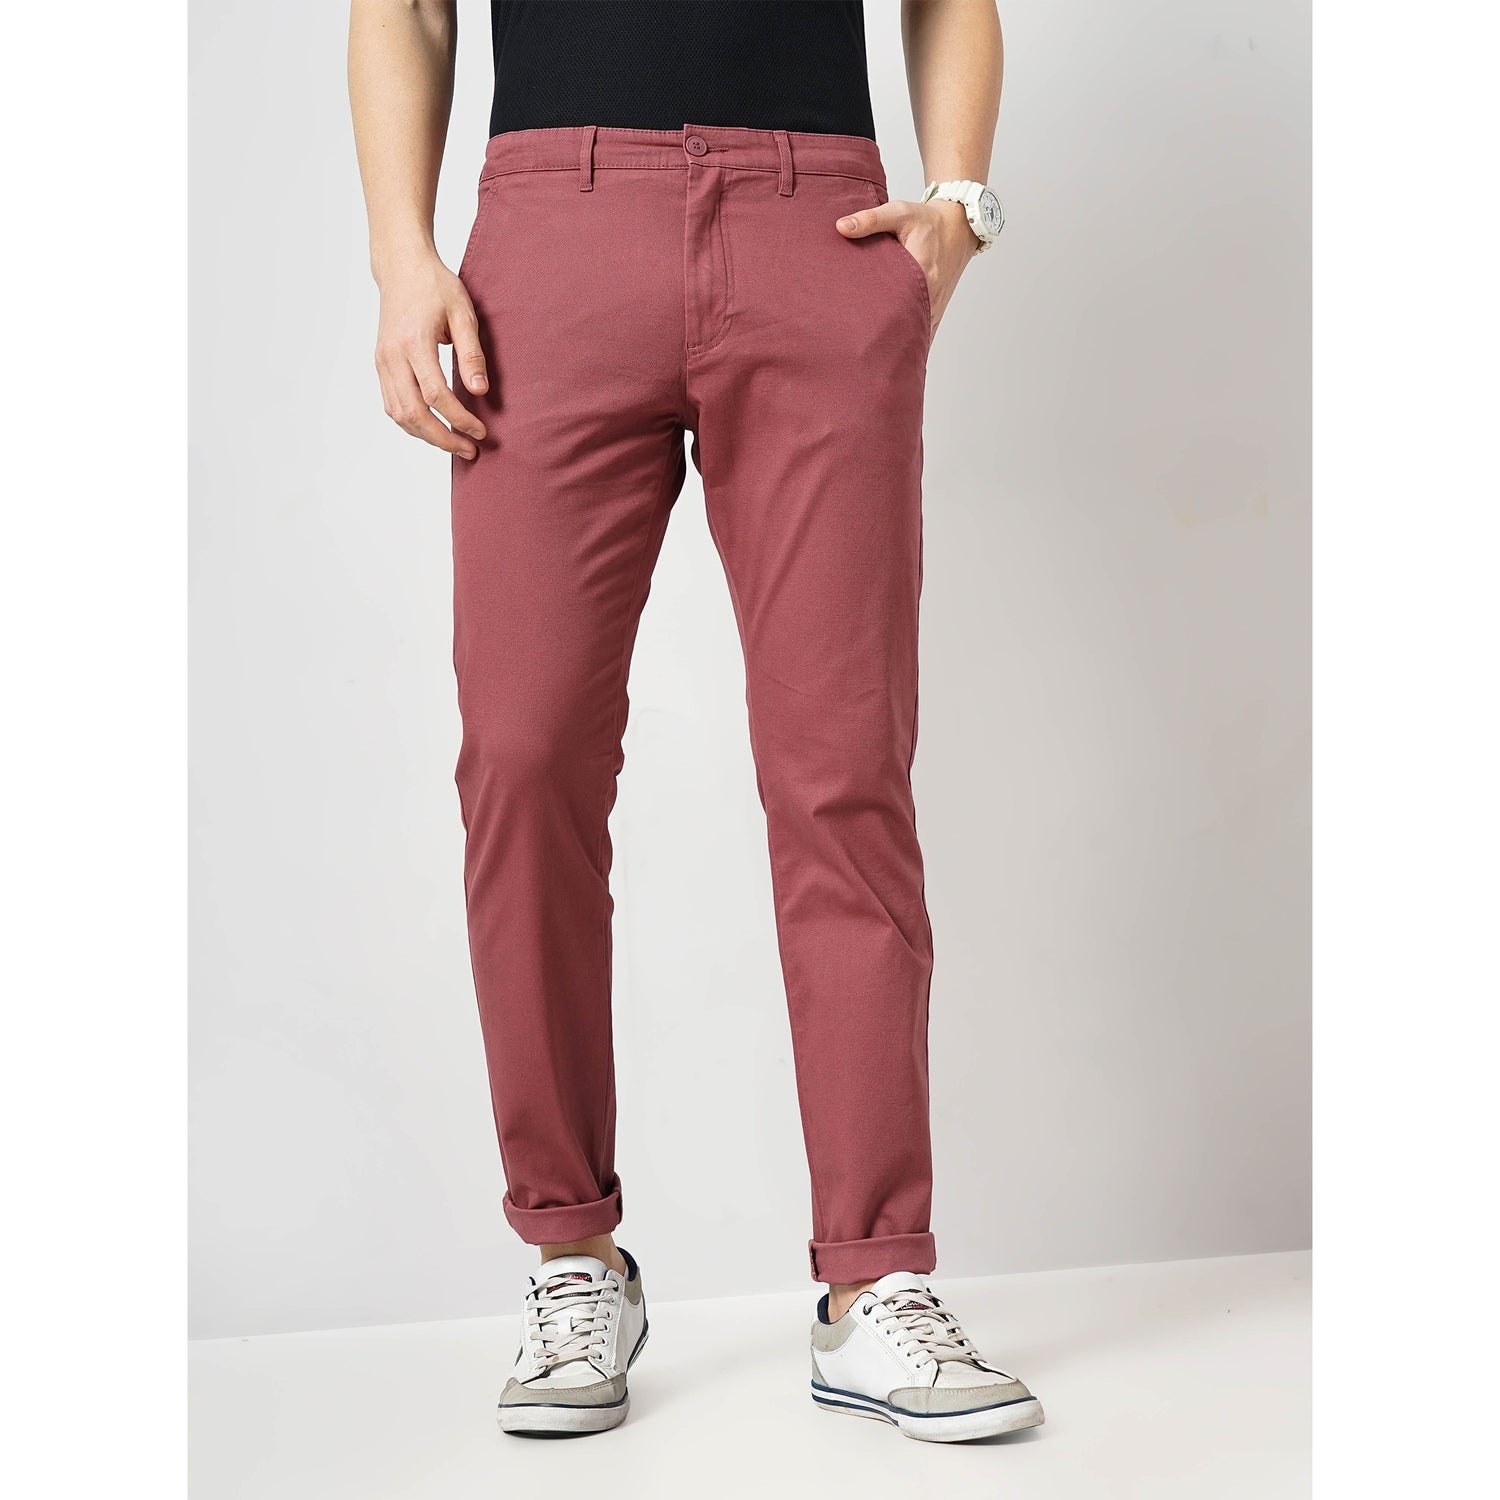 Men Maroon Solid Slim Fit Cotton Basic Chinos Casual Trousers (TOCHARLES1)